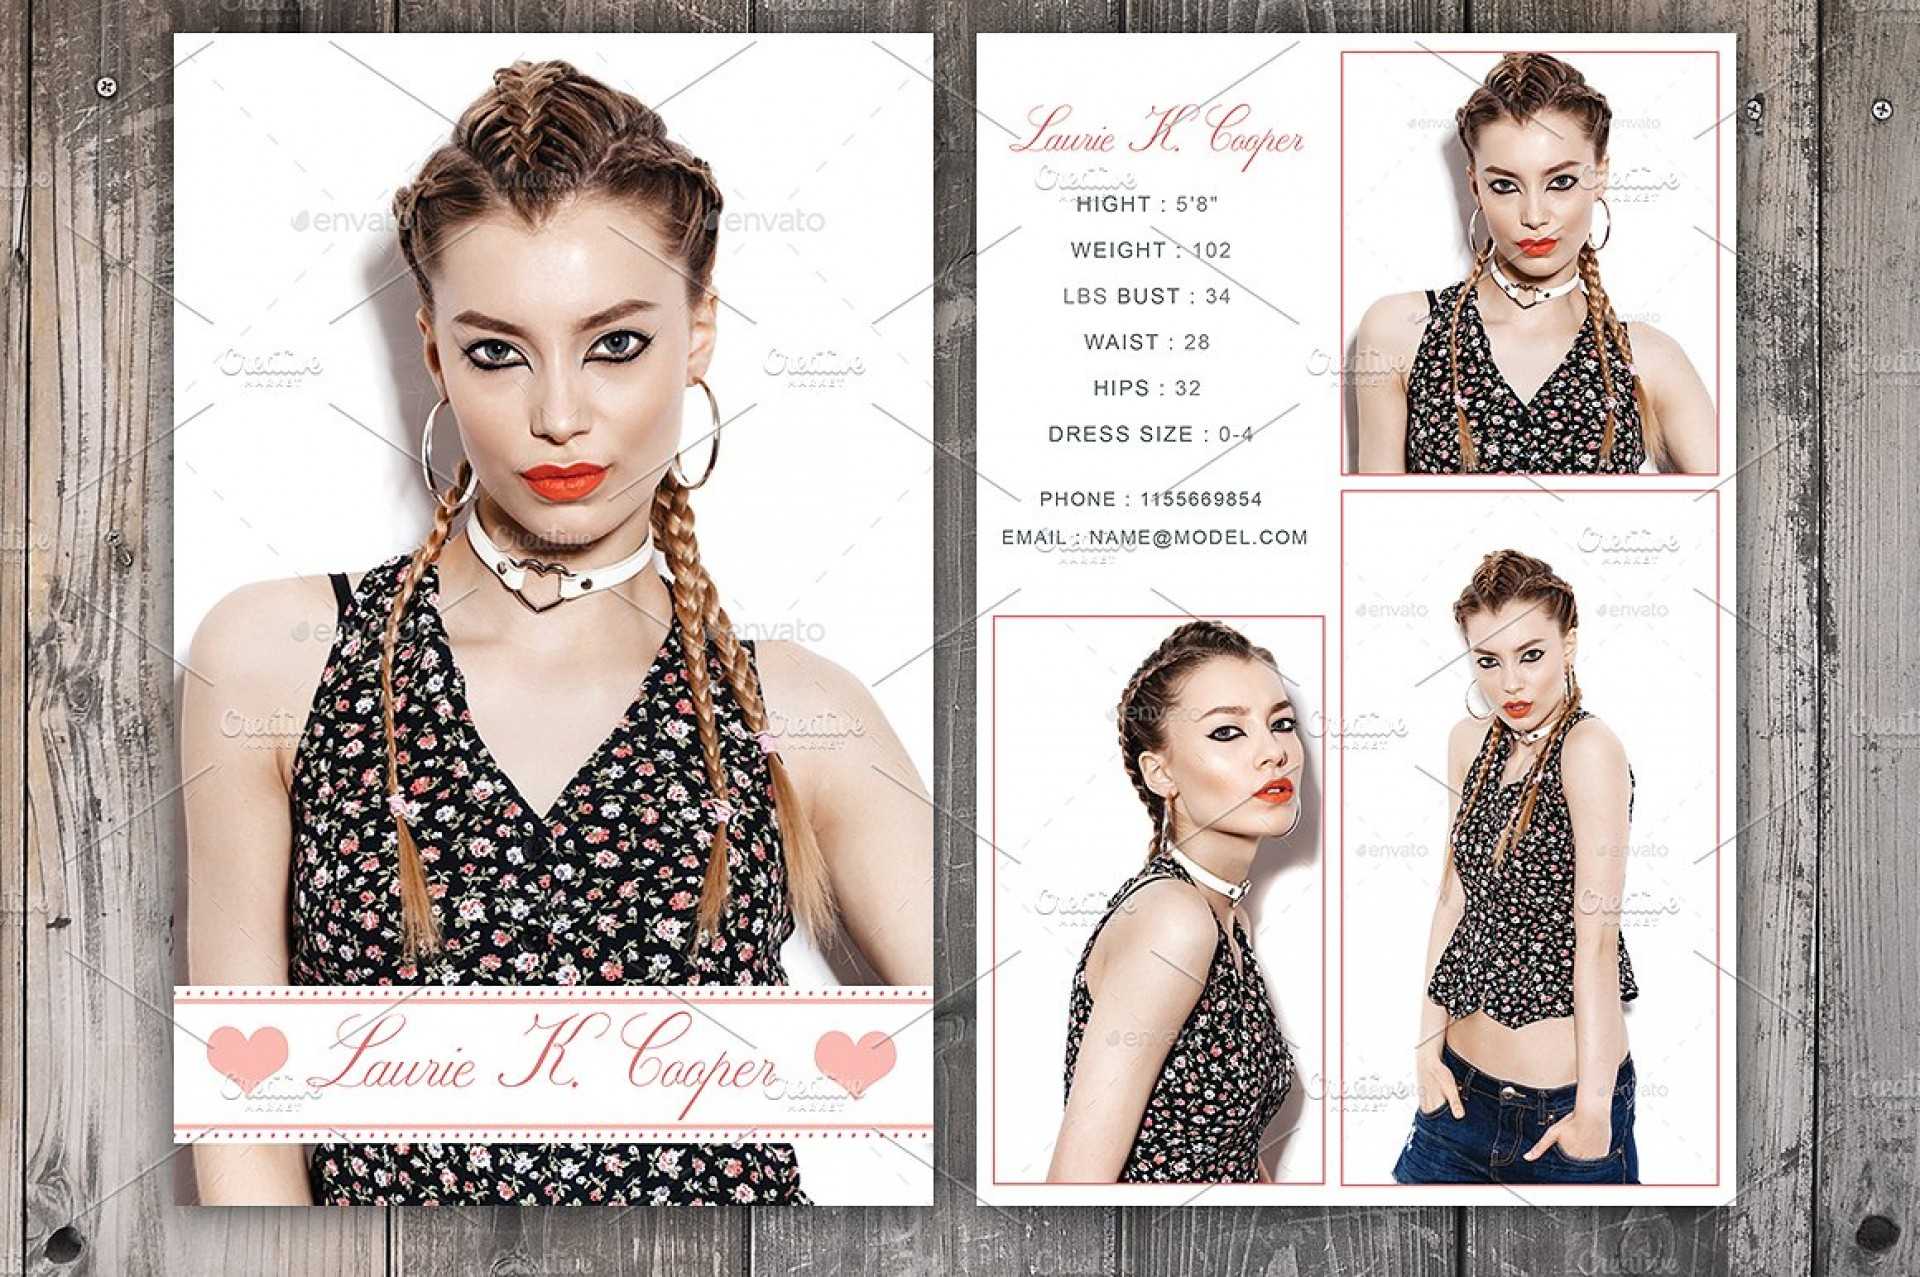 Download Comp Card Template – Atlantaauctionco For Free Model Comp Card Template